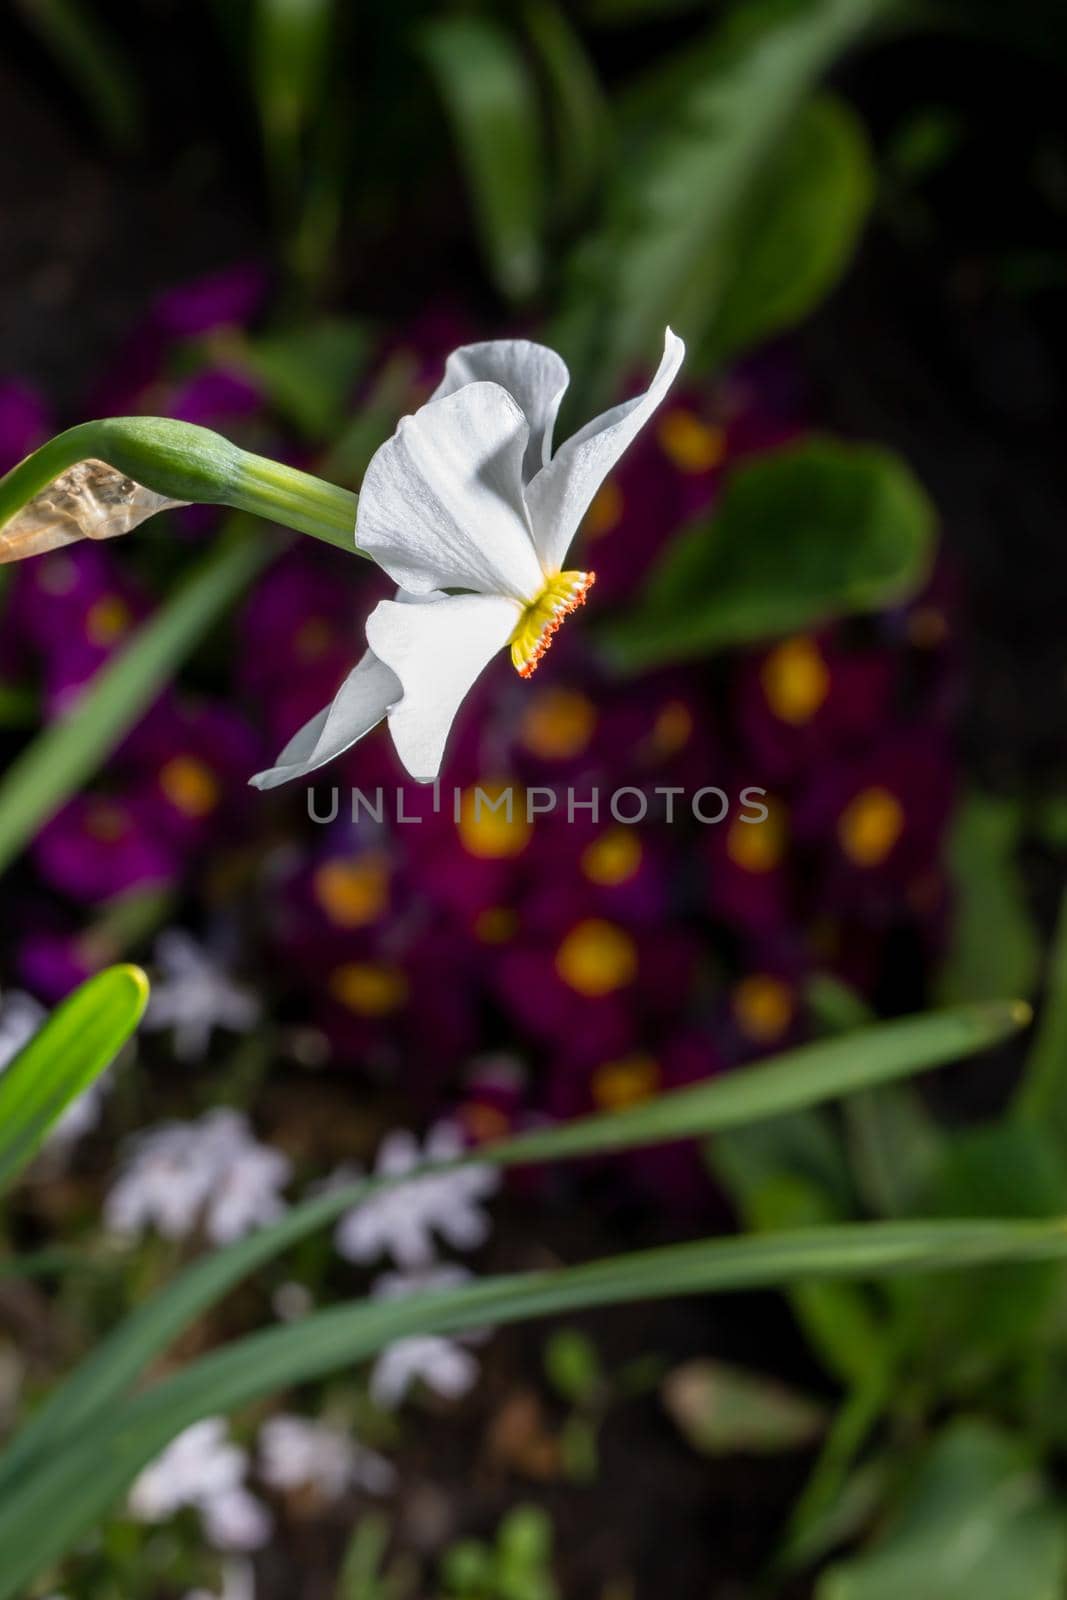 Celebration of life, white narcissus in spring over blurred nature background. Close-up side view